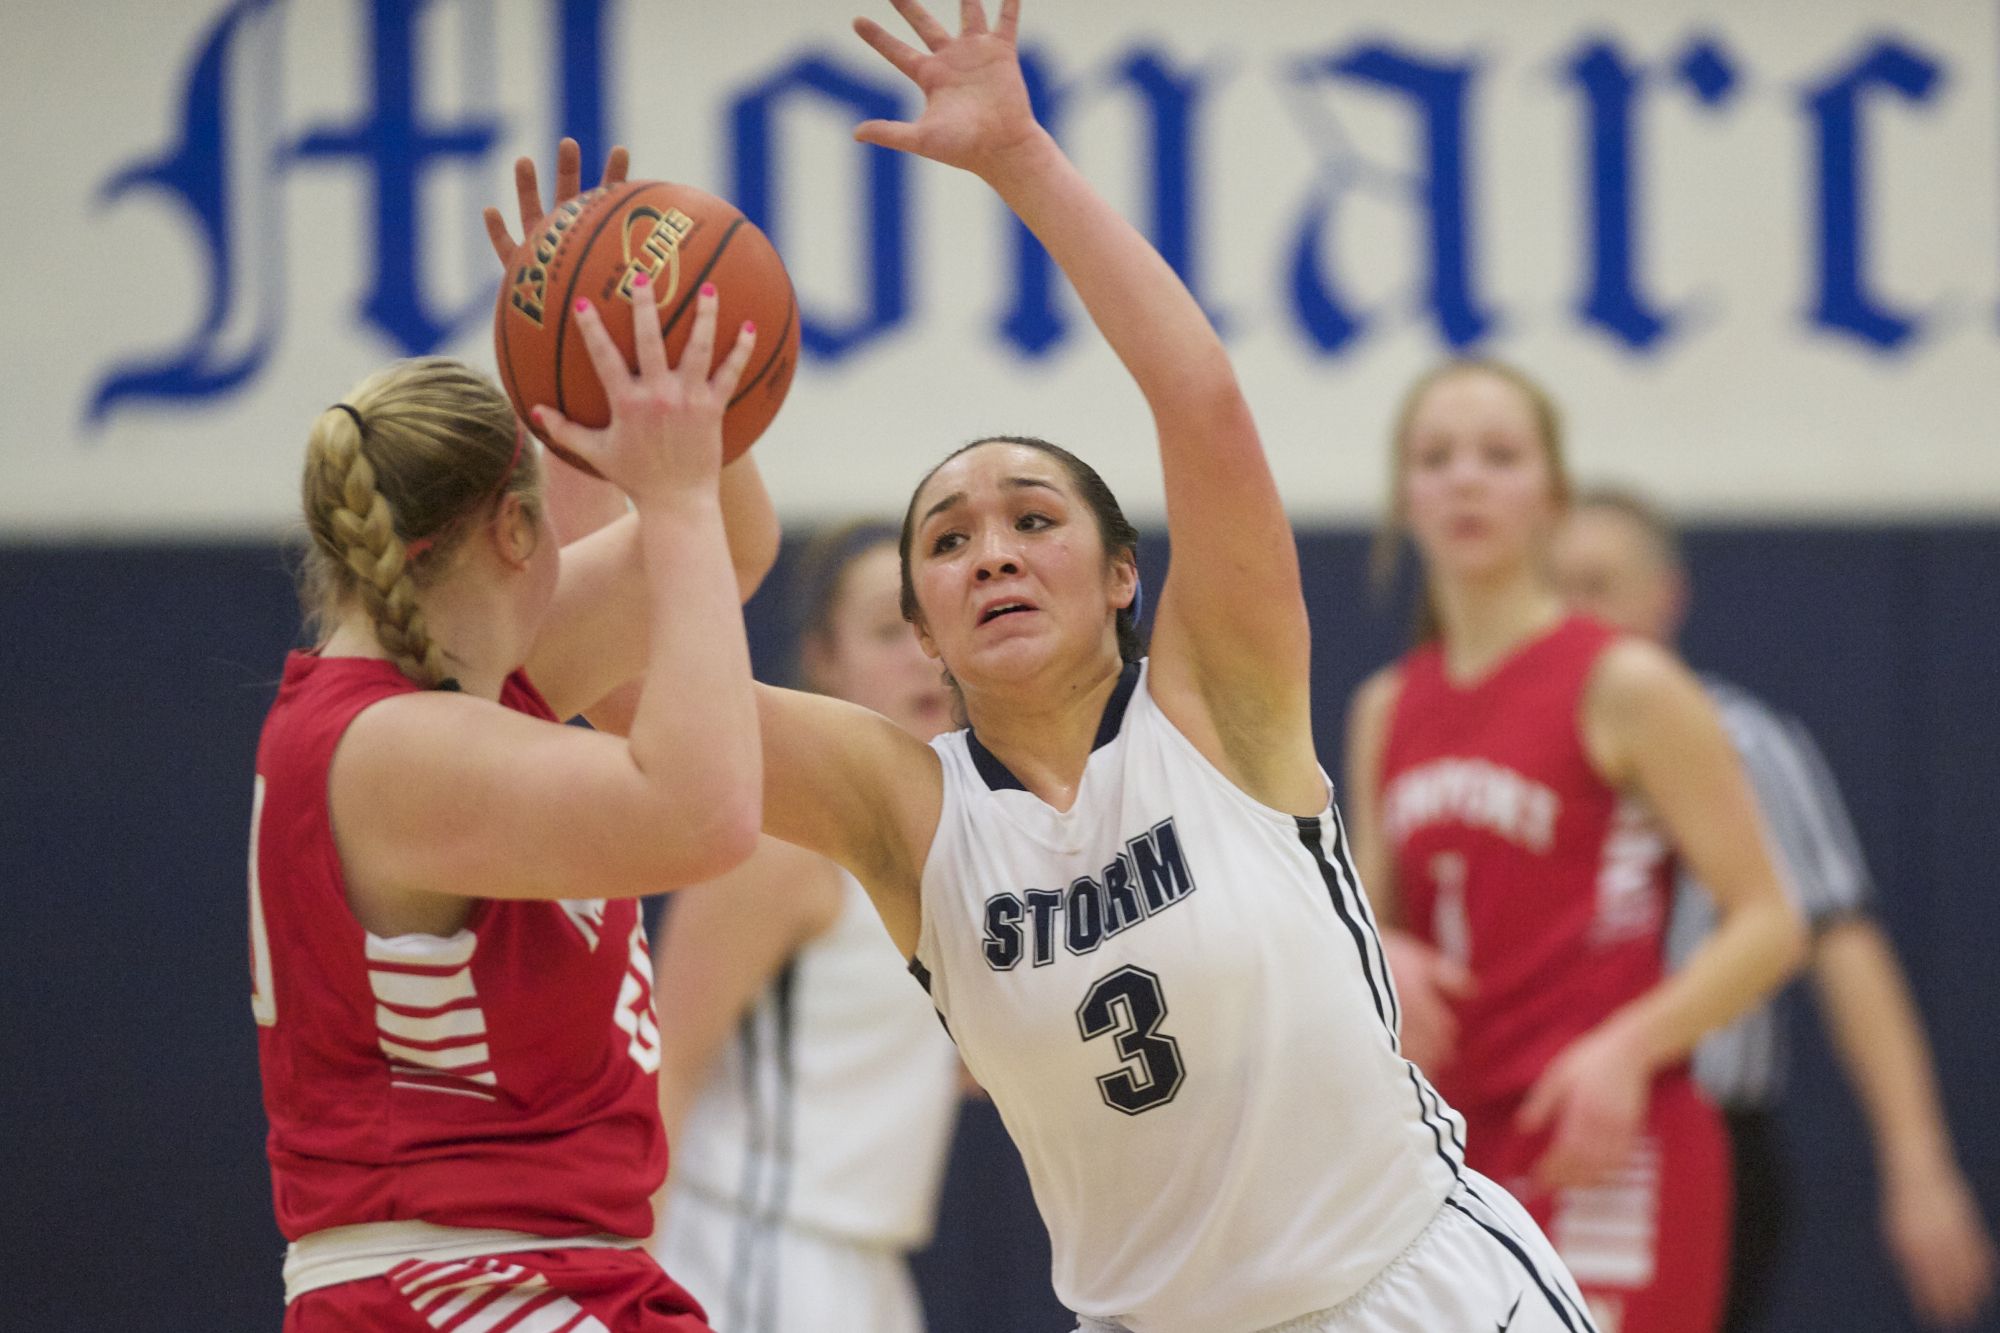 Stephanie McDonagh likes to draw the opponent's best player as her defensive assignment and serve as Skyview's sparkplug on defense.